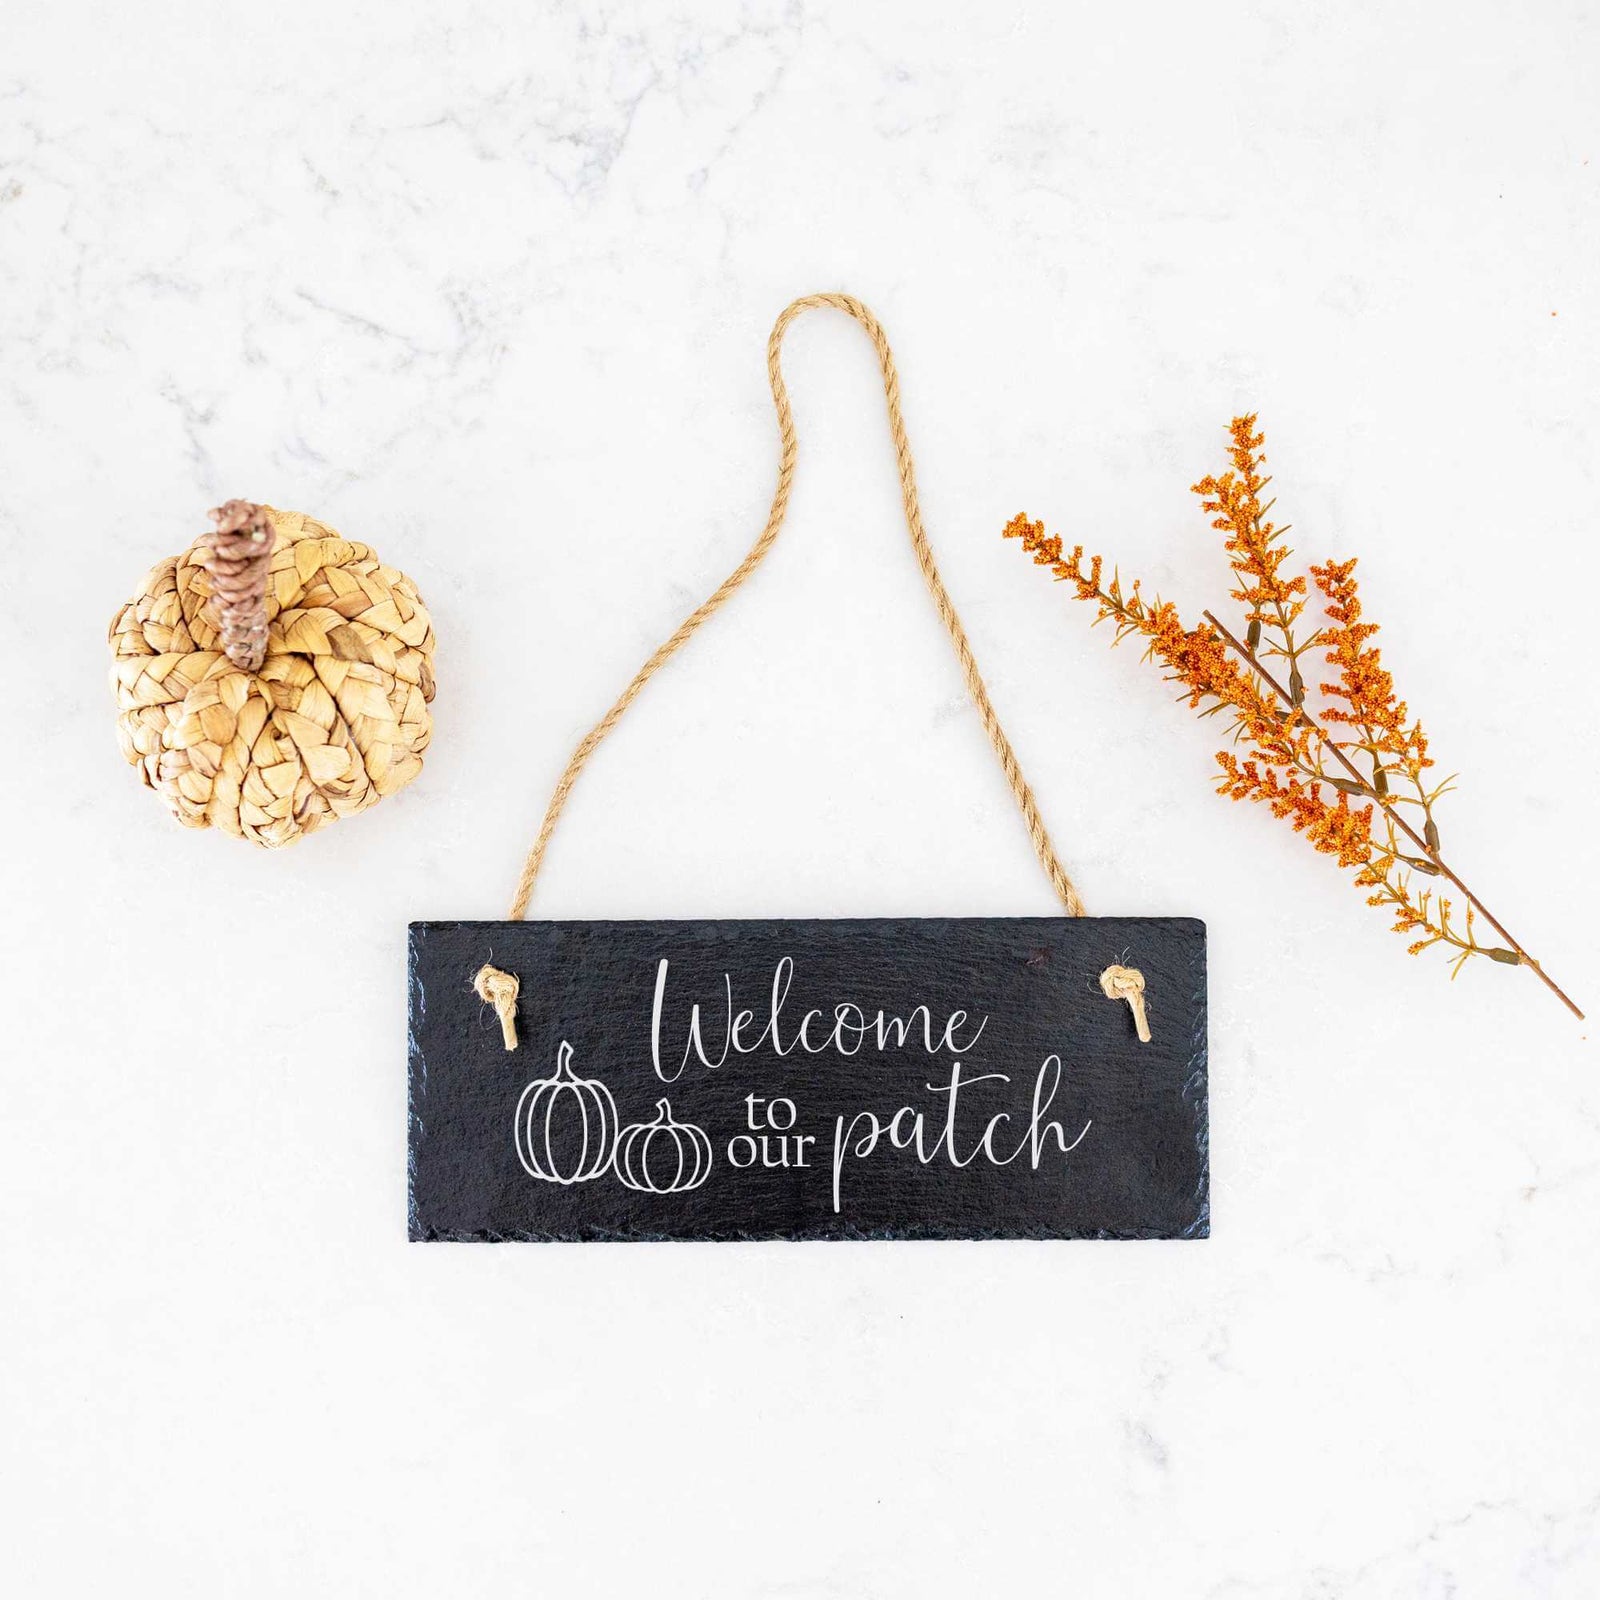 Welcome to our Patch - Slate Welcome Sign